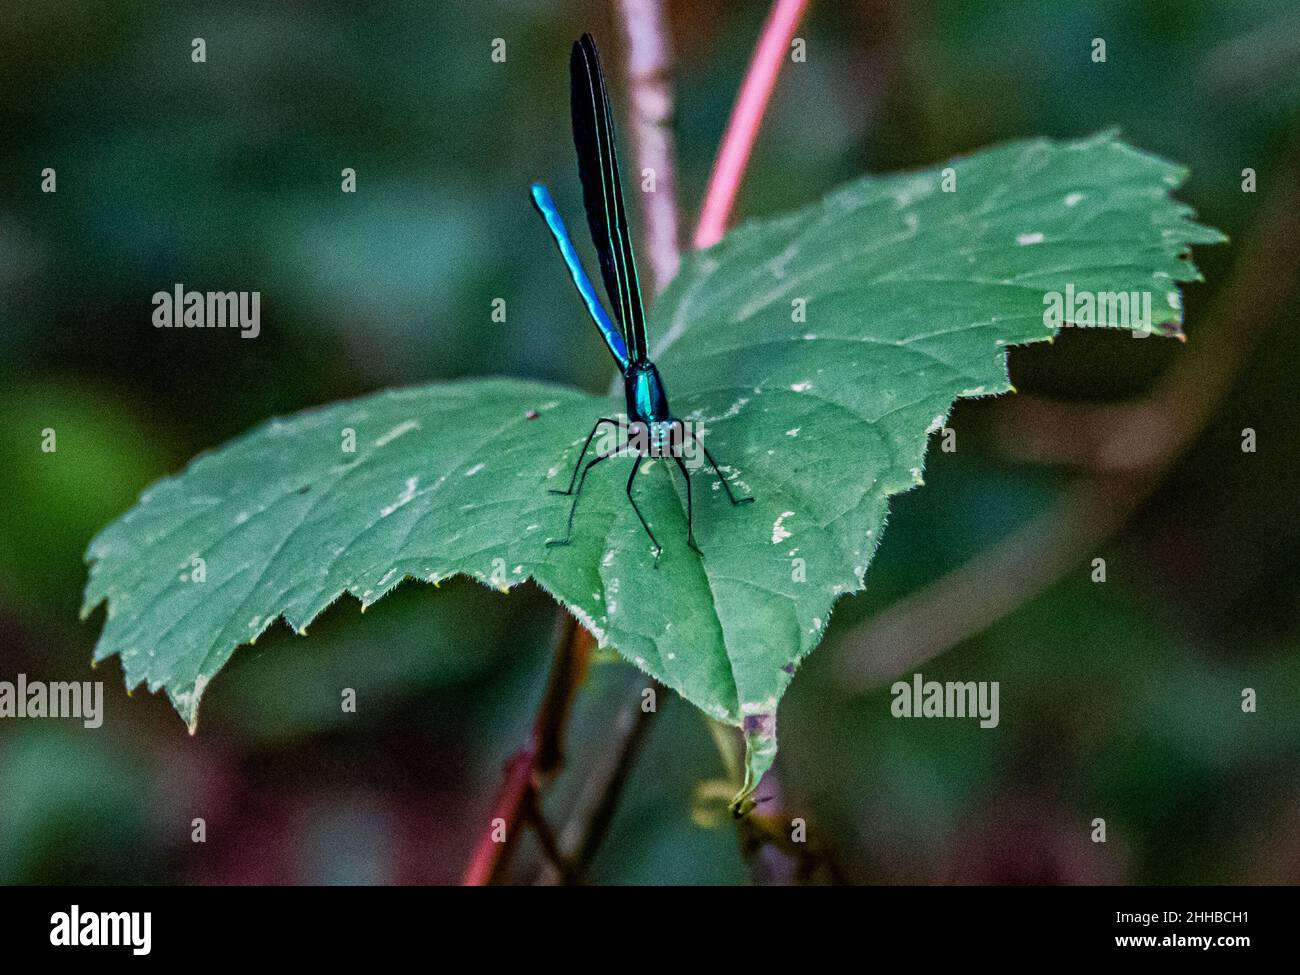 Ebony Jewelwing Damselfly On A Leaf, Posing for the Camera Stock Photo